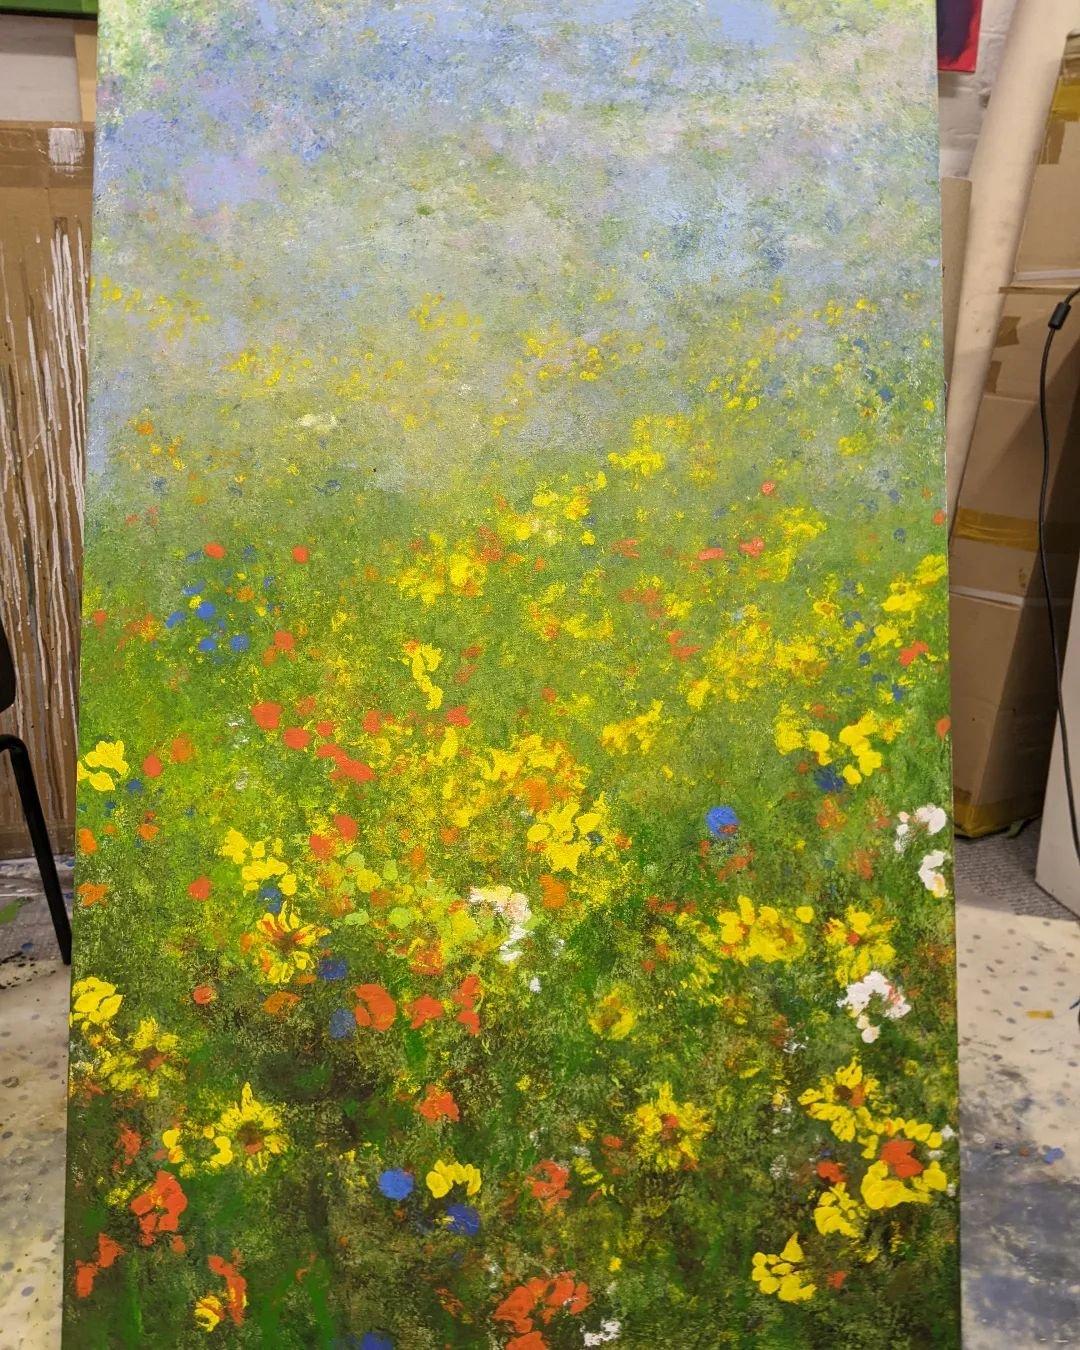 Something to remind us of summer :), and a change from my more serious works ...

Work in progress on a new floral inspired painting 

#summerflowers 
#beautifulpainting 
#summervibes 
#flowermeadow 
#uplifting 
#impressionistart 
#impressionistpaint